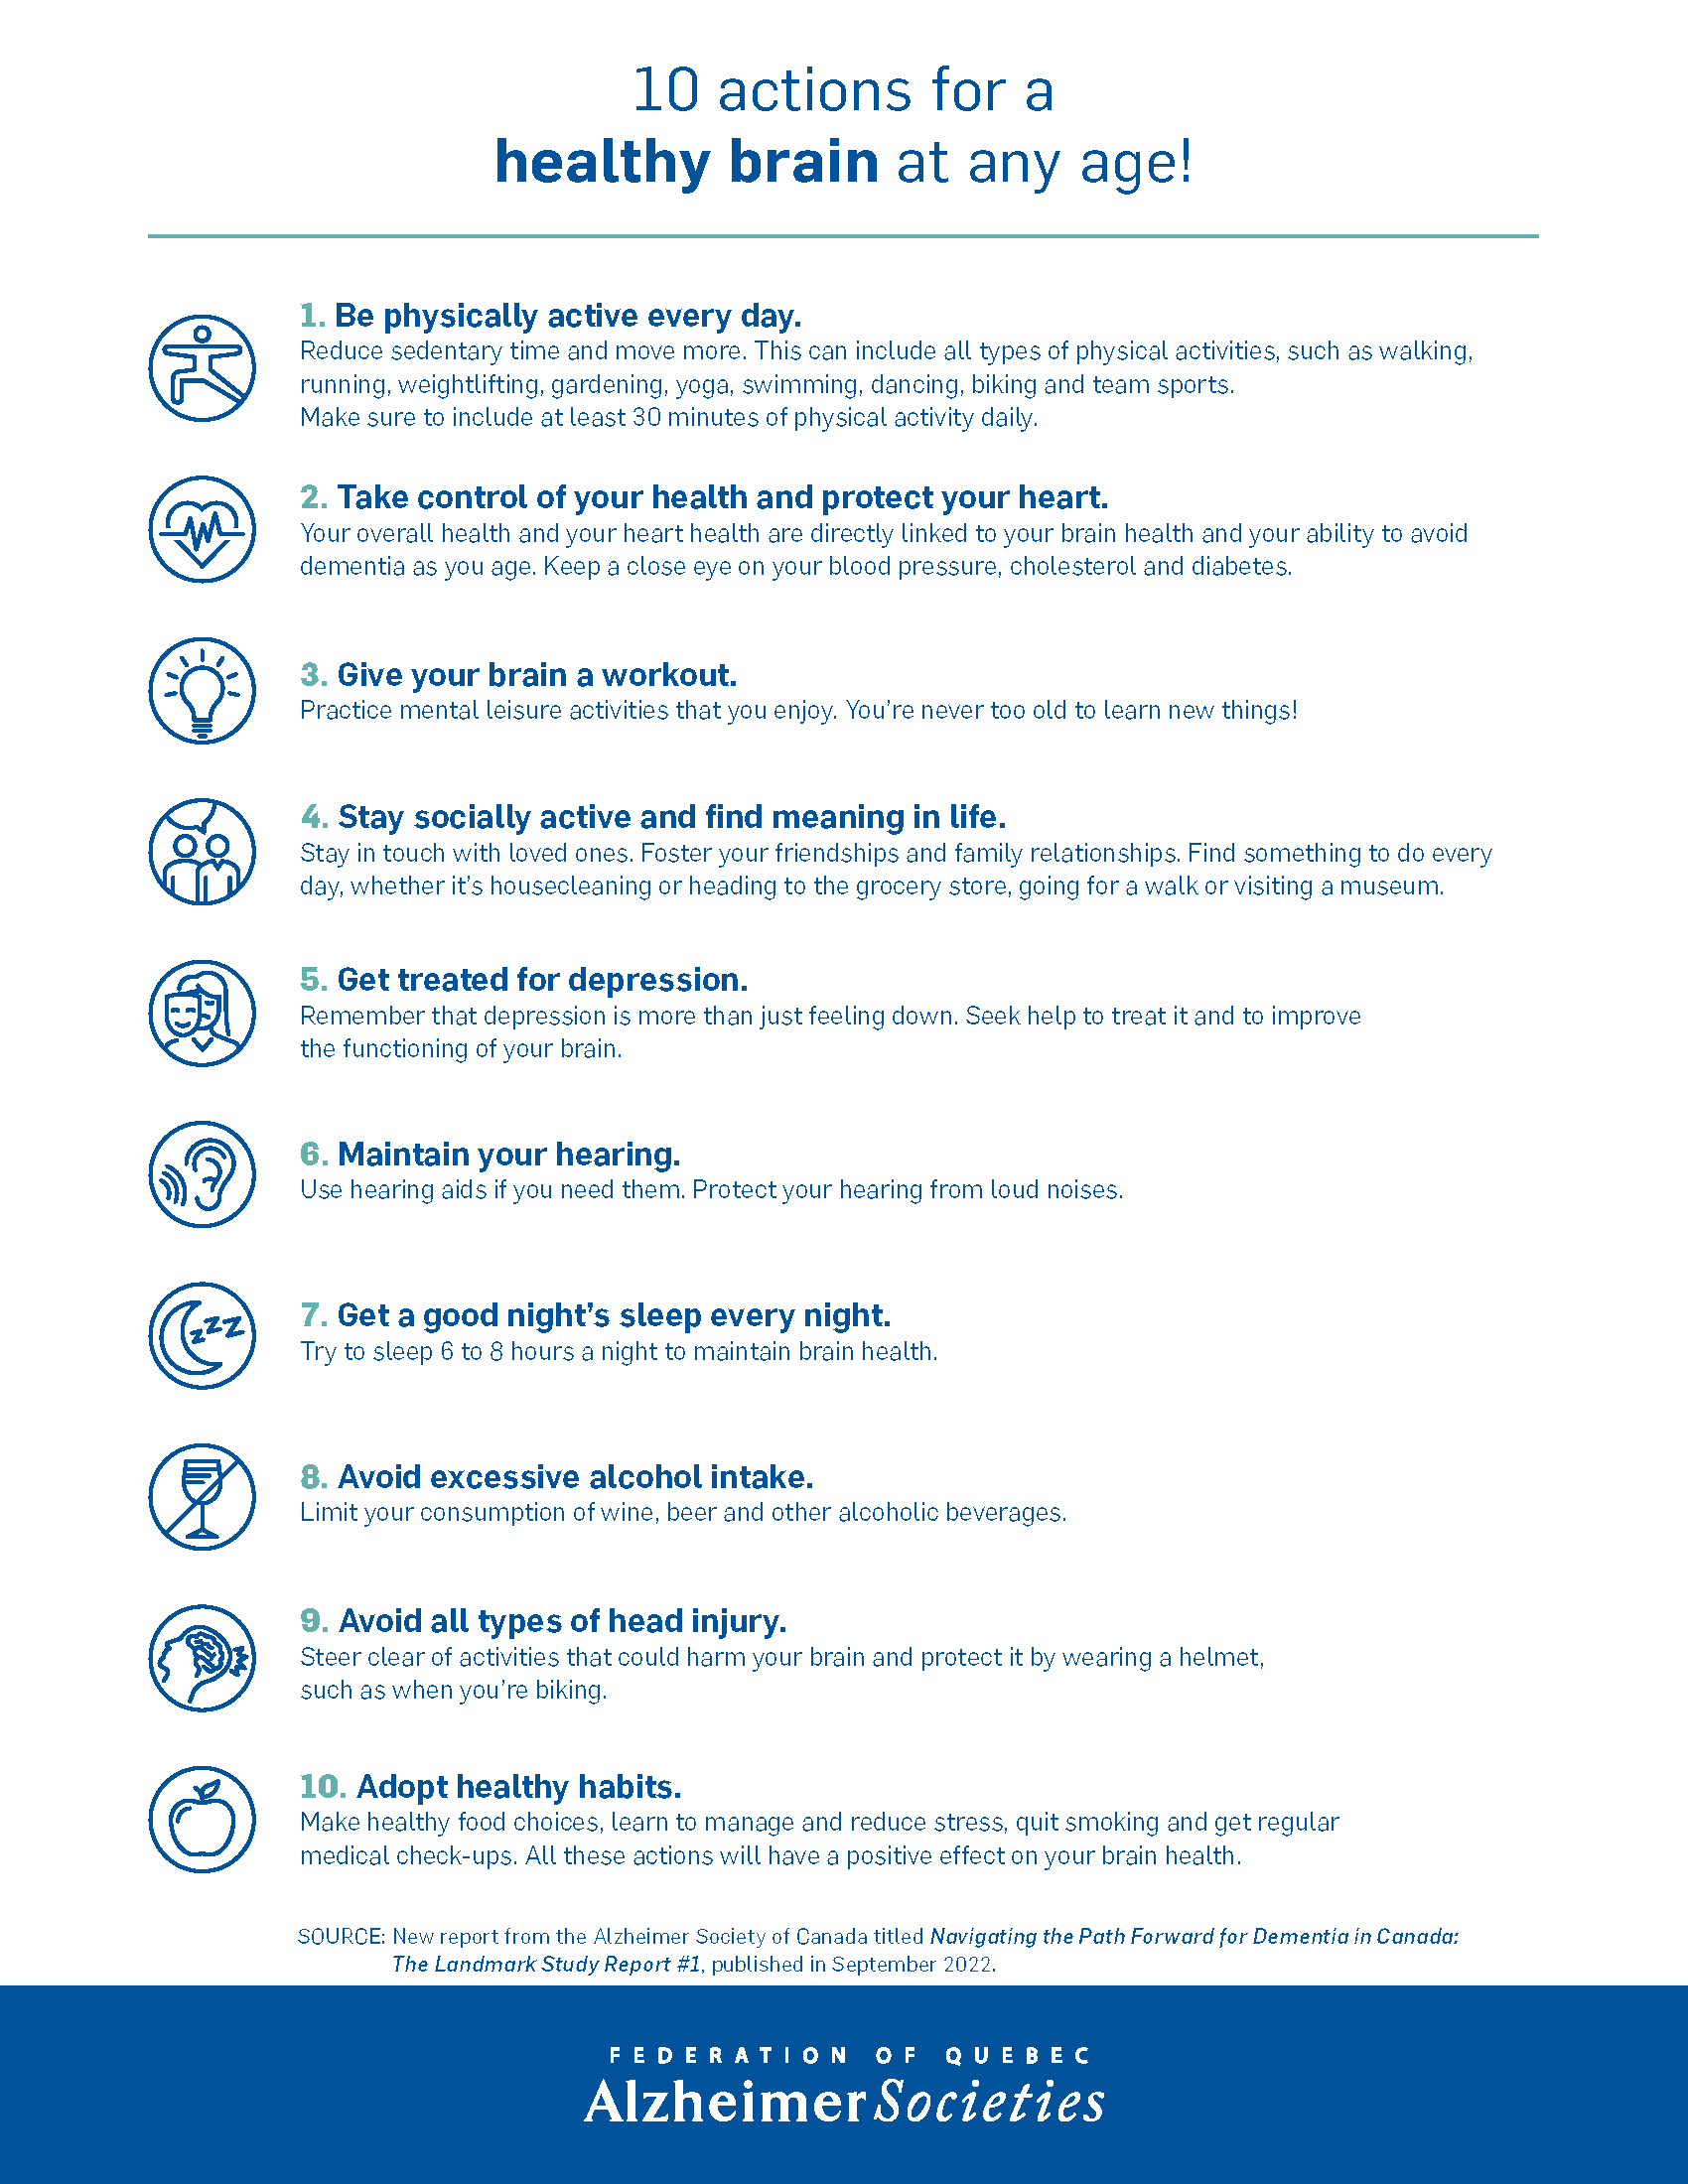 10 actions for a healthy brain